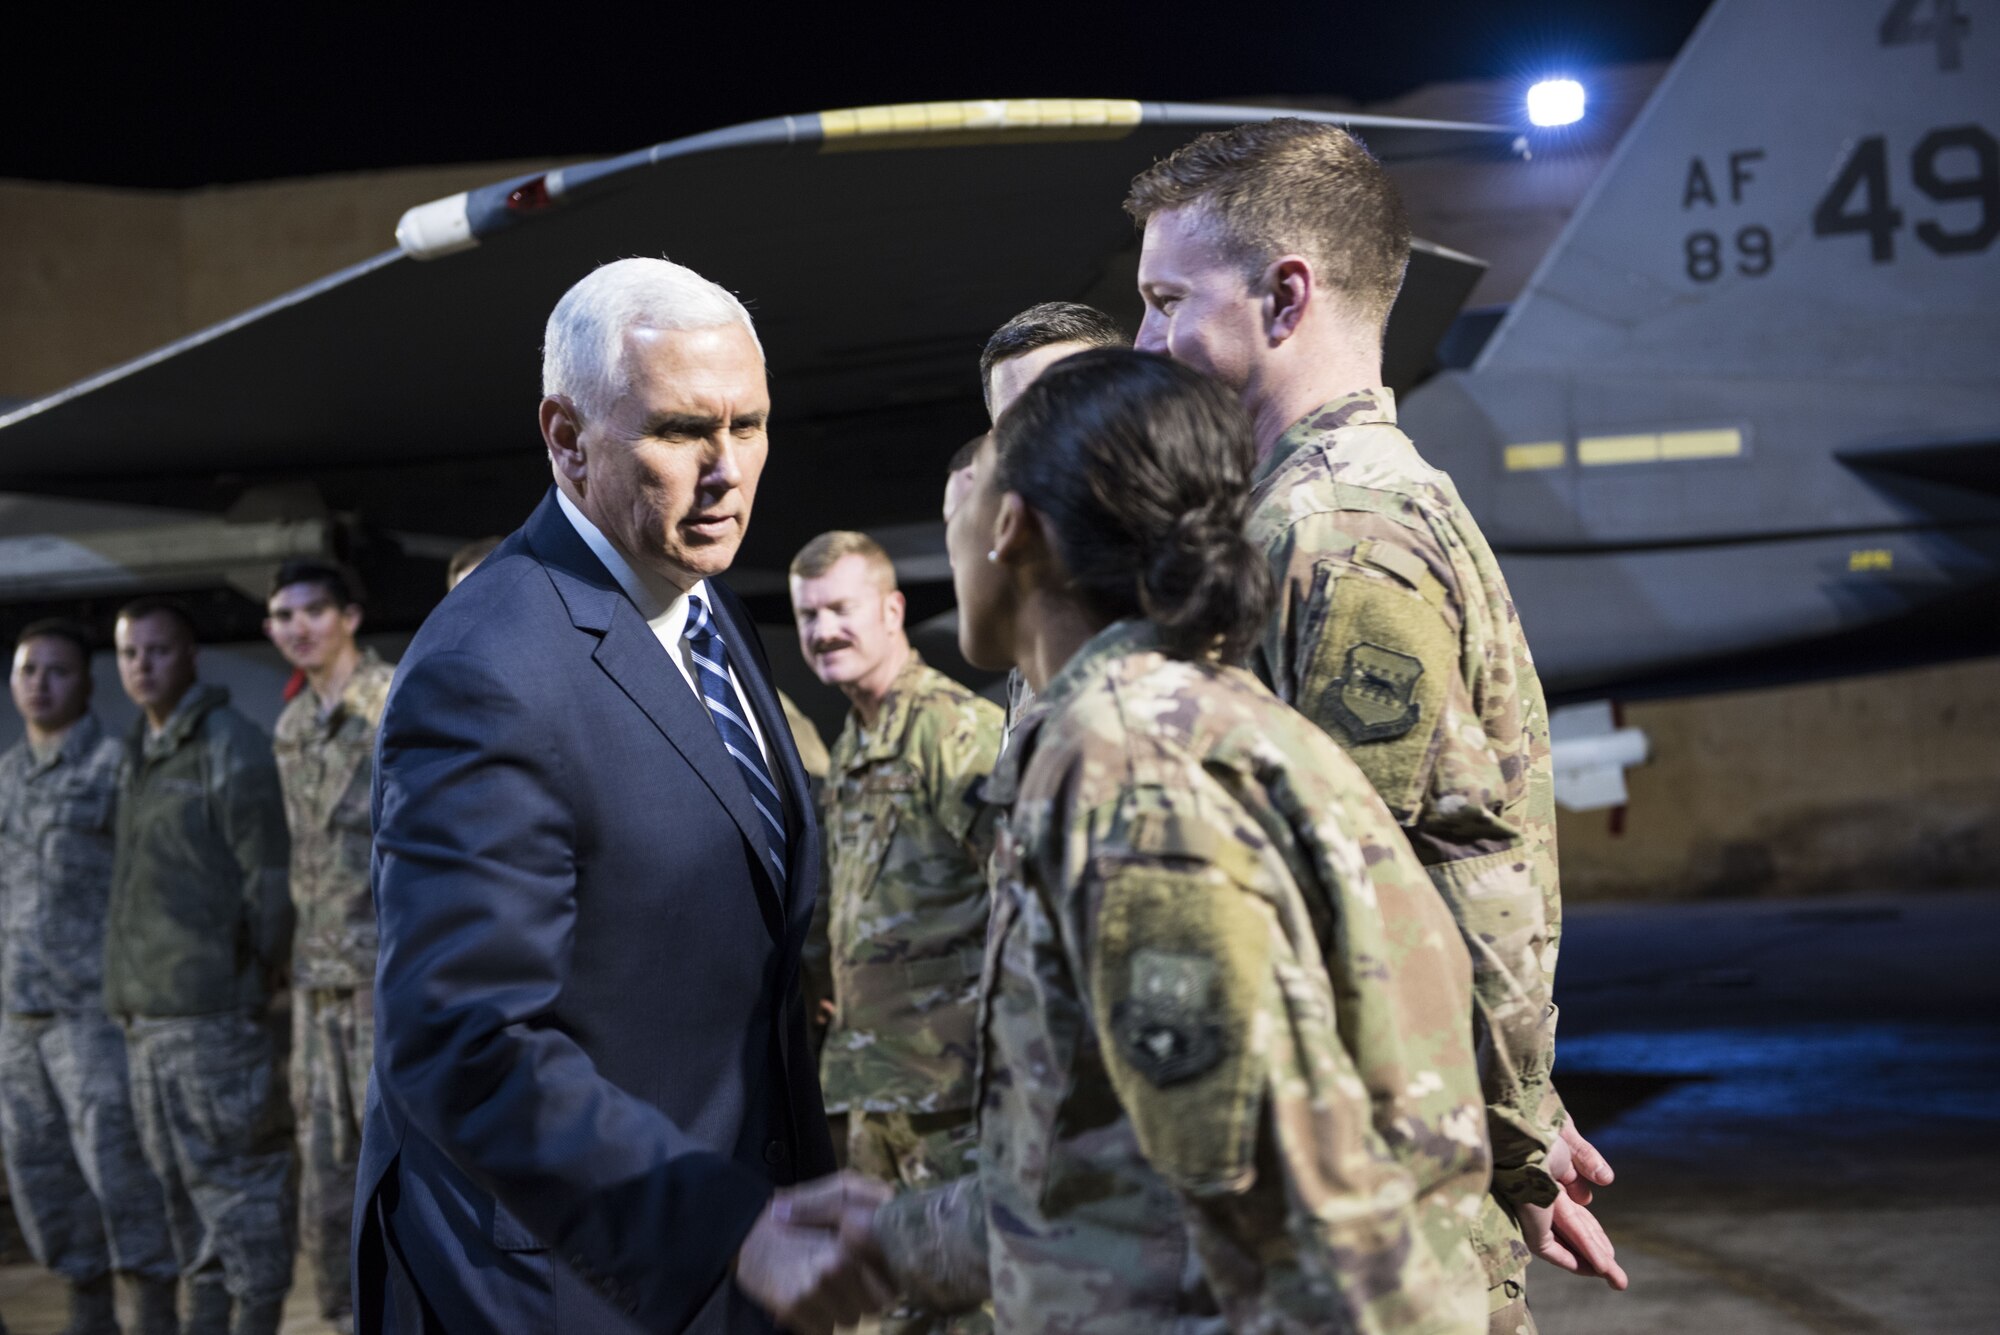 U.S. Vice President Mike Pence visits with deployed service members assigned to the 332d Air Expeditionary Wing January 21, 2018, at an undisclosed location in Southwest Asia. After a series of operations briefings, Pence addressed the crowd and took time to shake hands and take photos. (U.S. Air Force photo by Staff Sgt. Joshua Kleinholz)